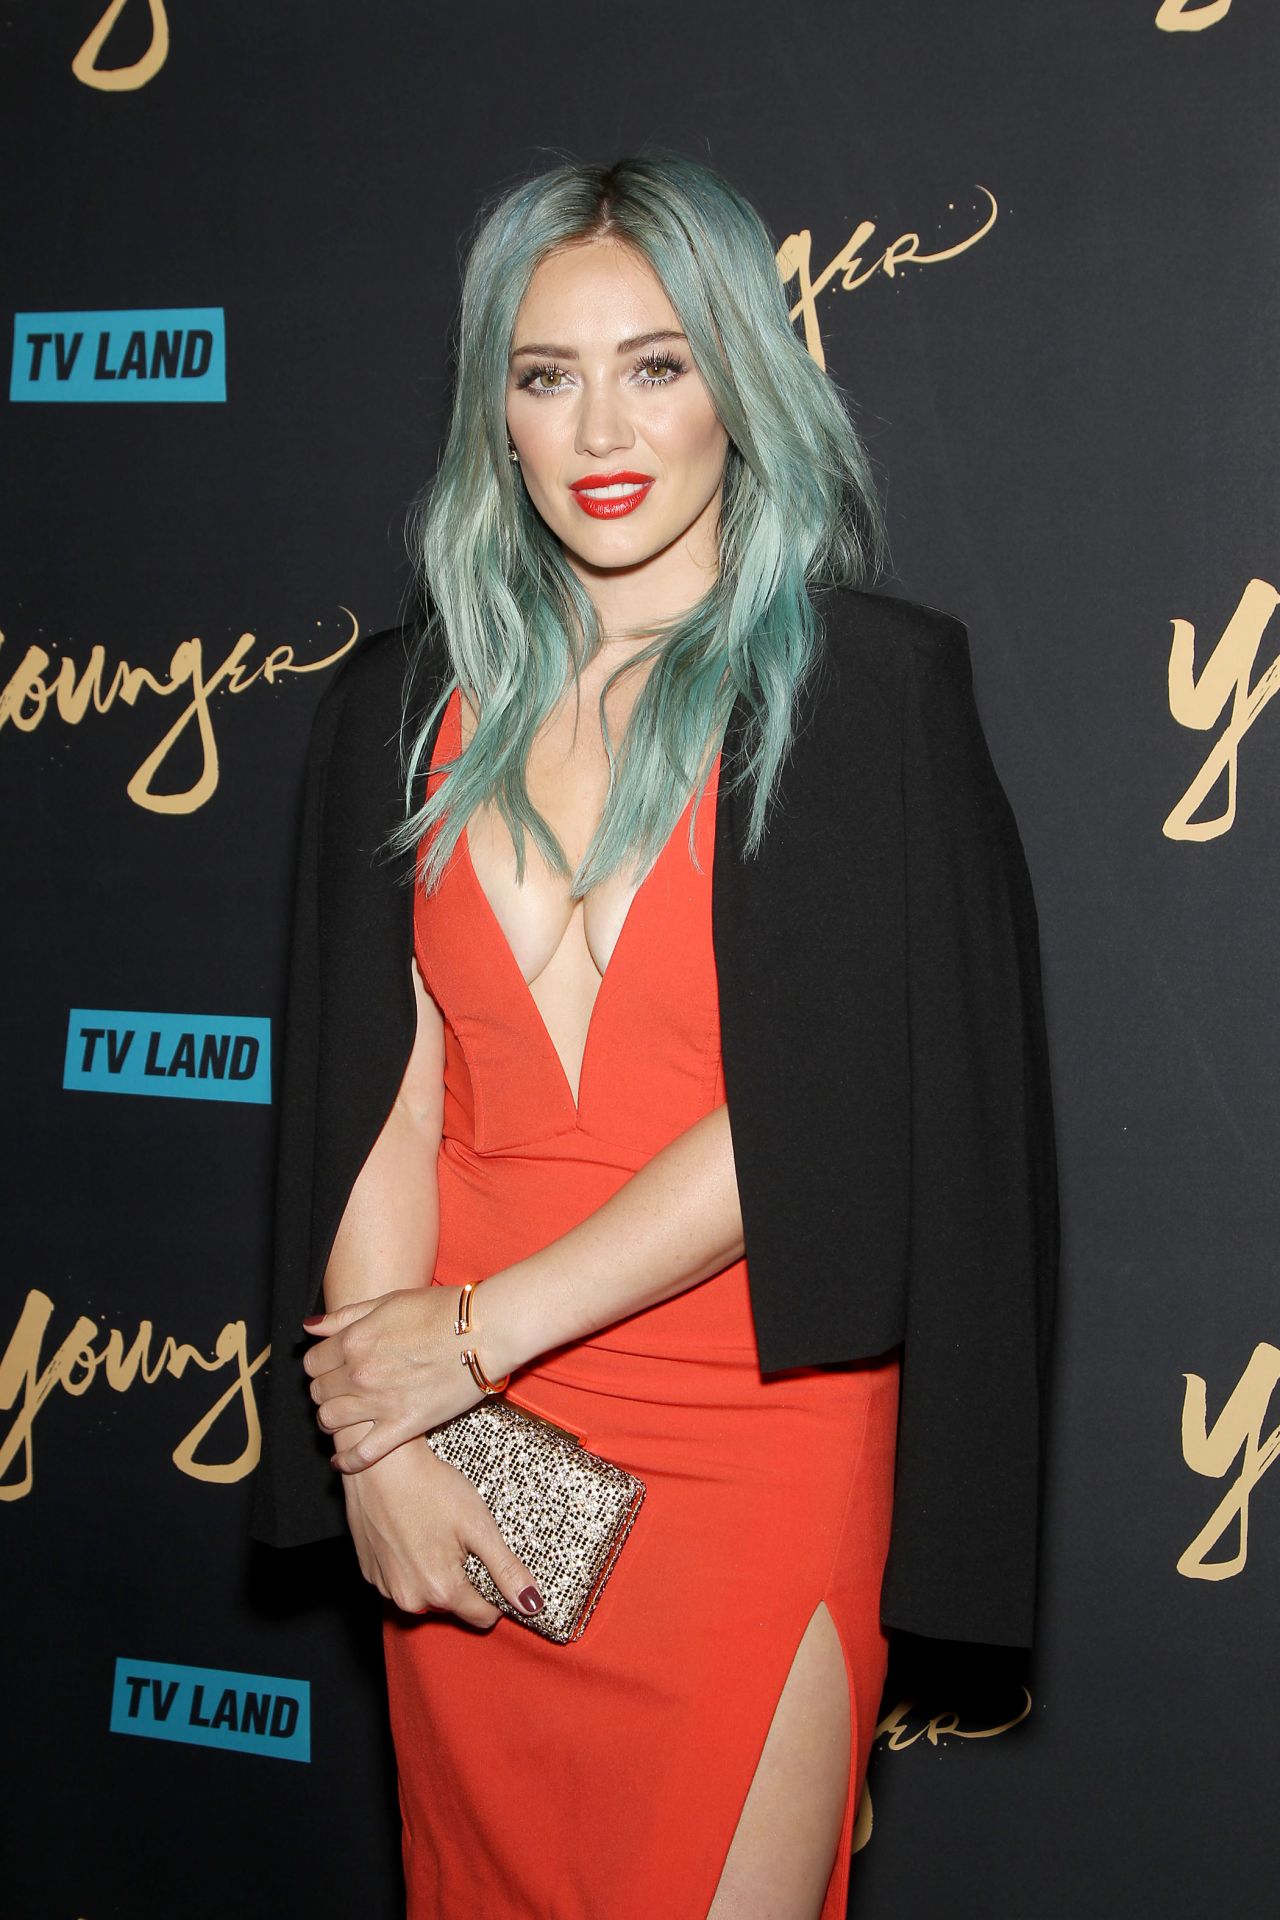 Hilary Duff - TV Land's 'Younger' Premiere in New York City1280 x 1920